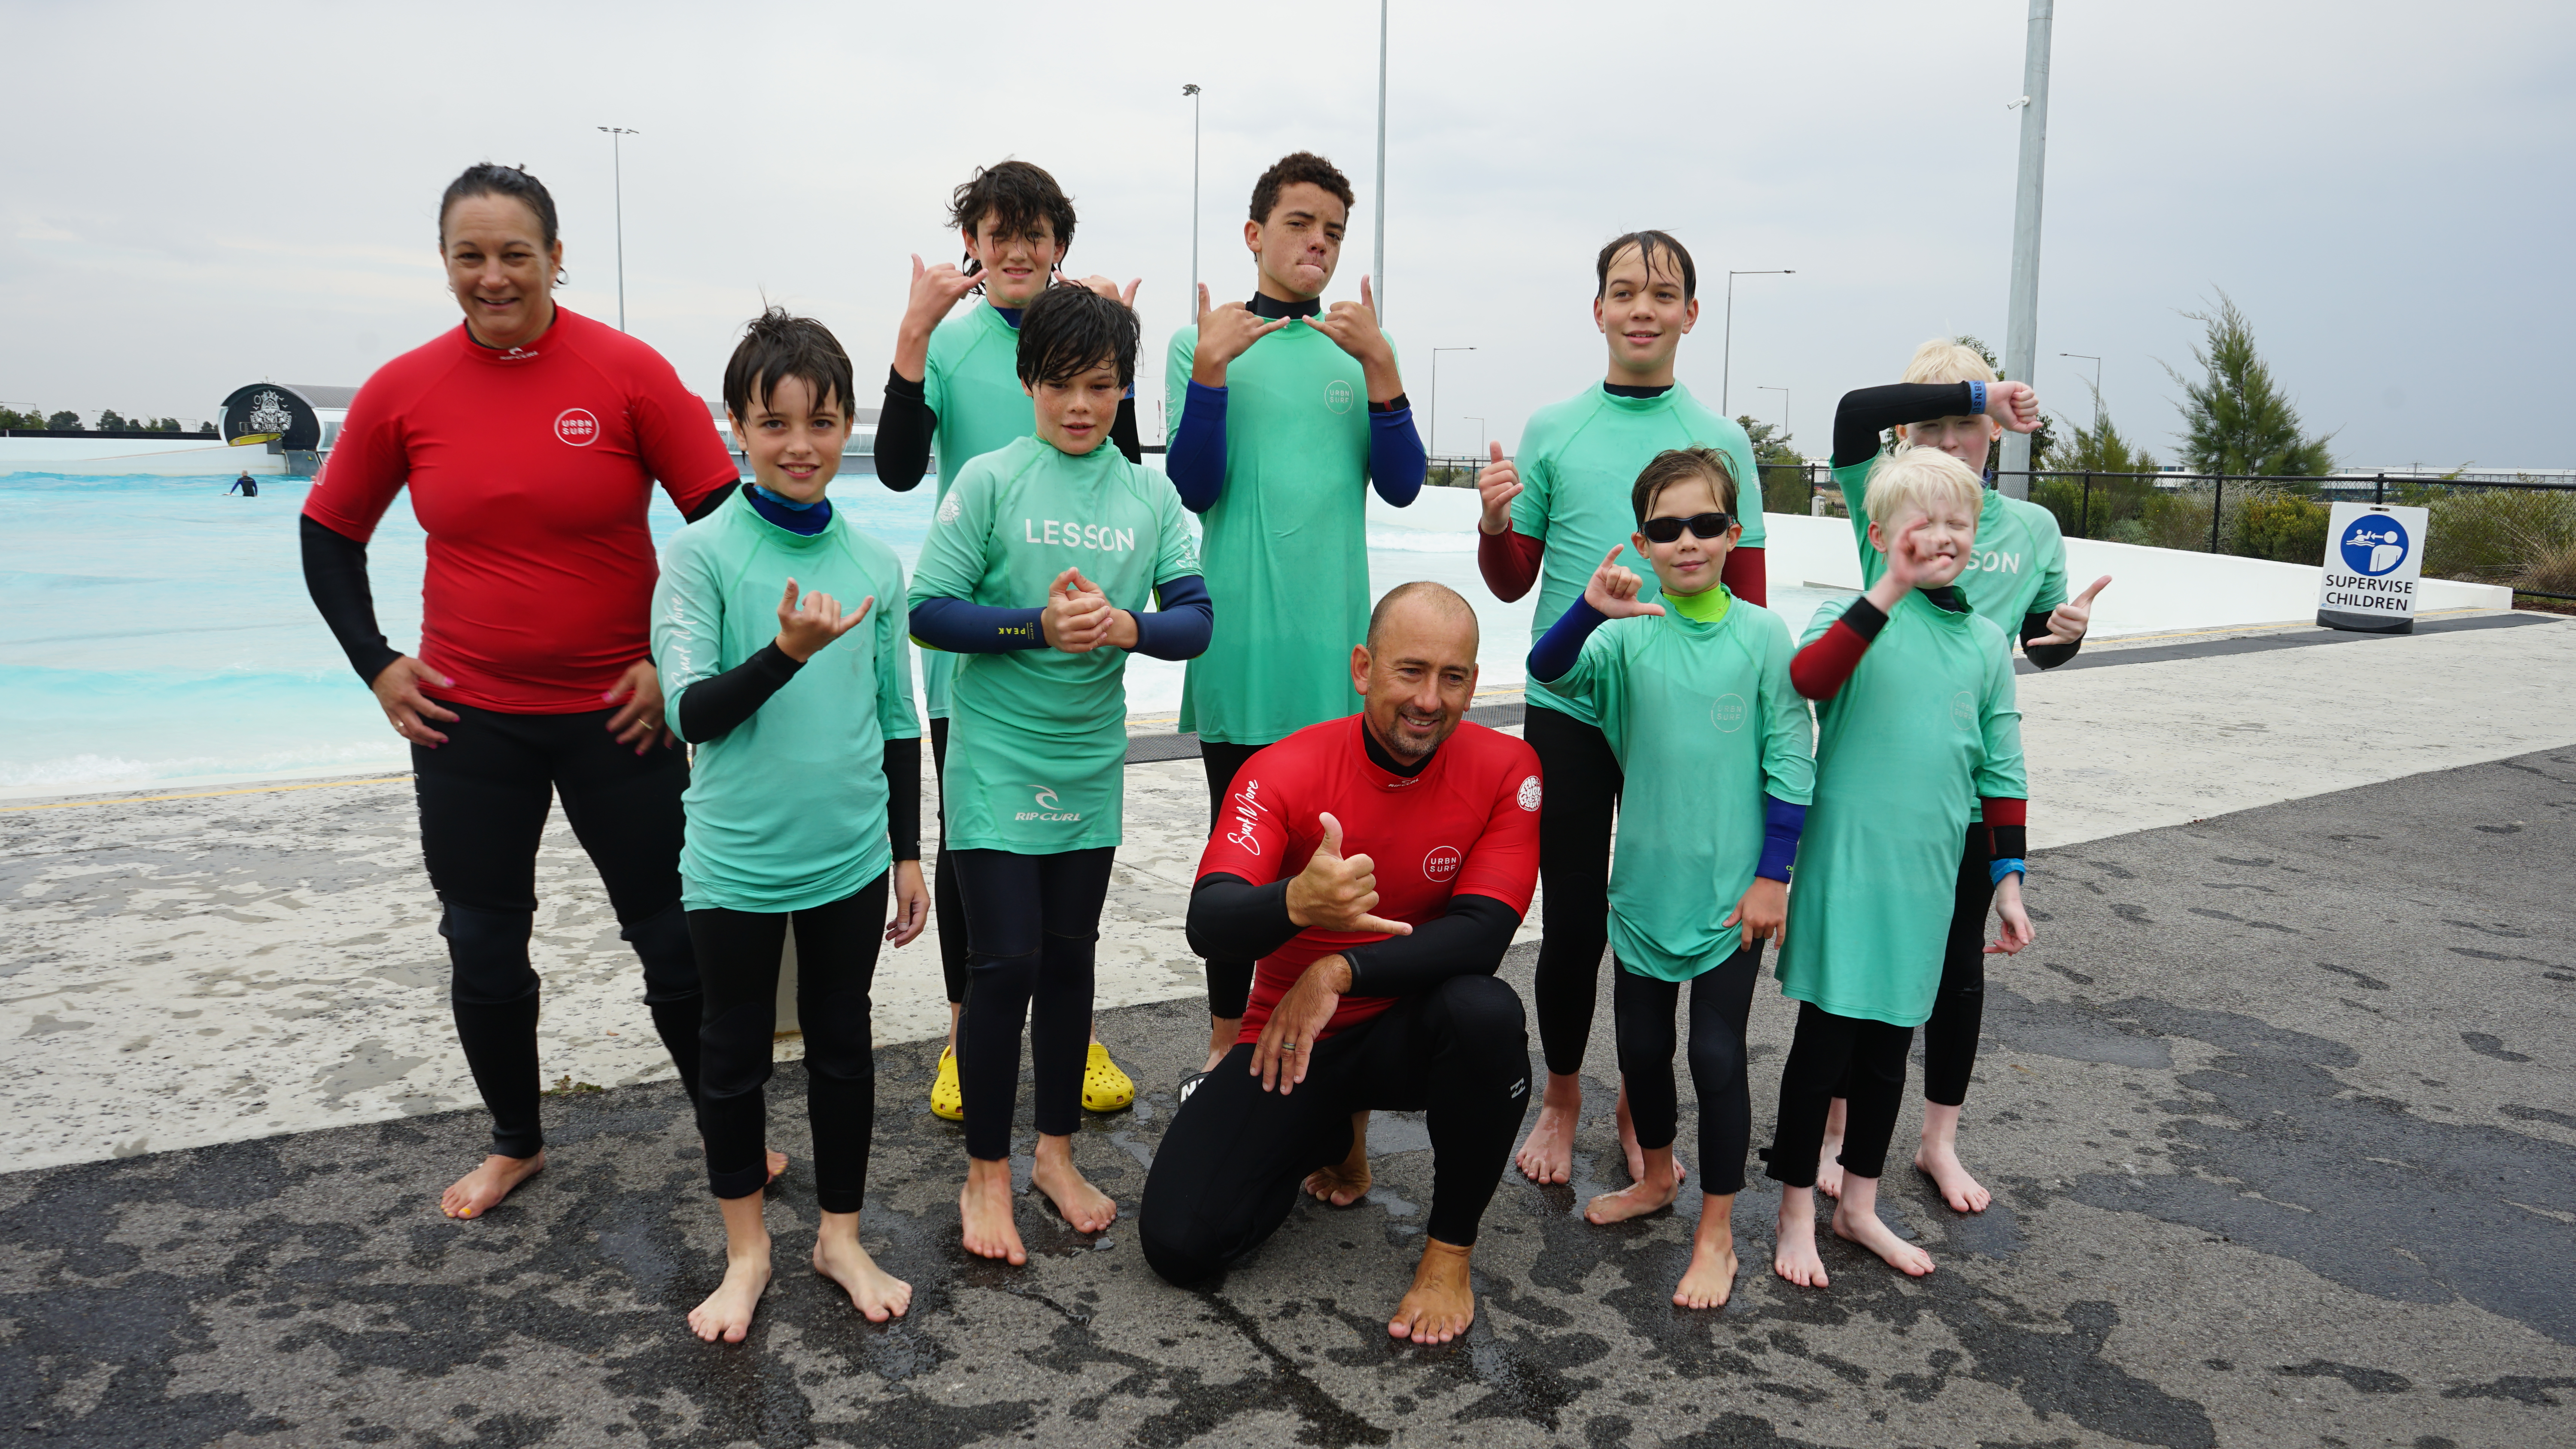 A group of children and adults in wetsuits in front of a wave pool